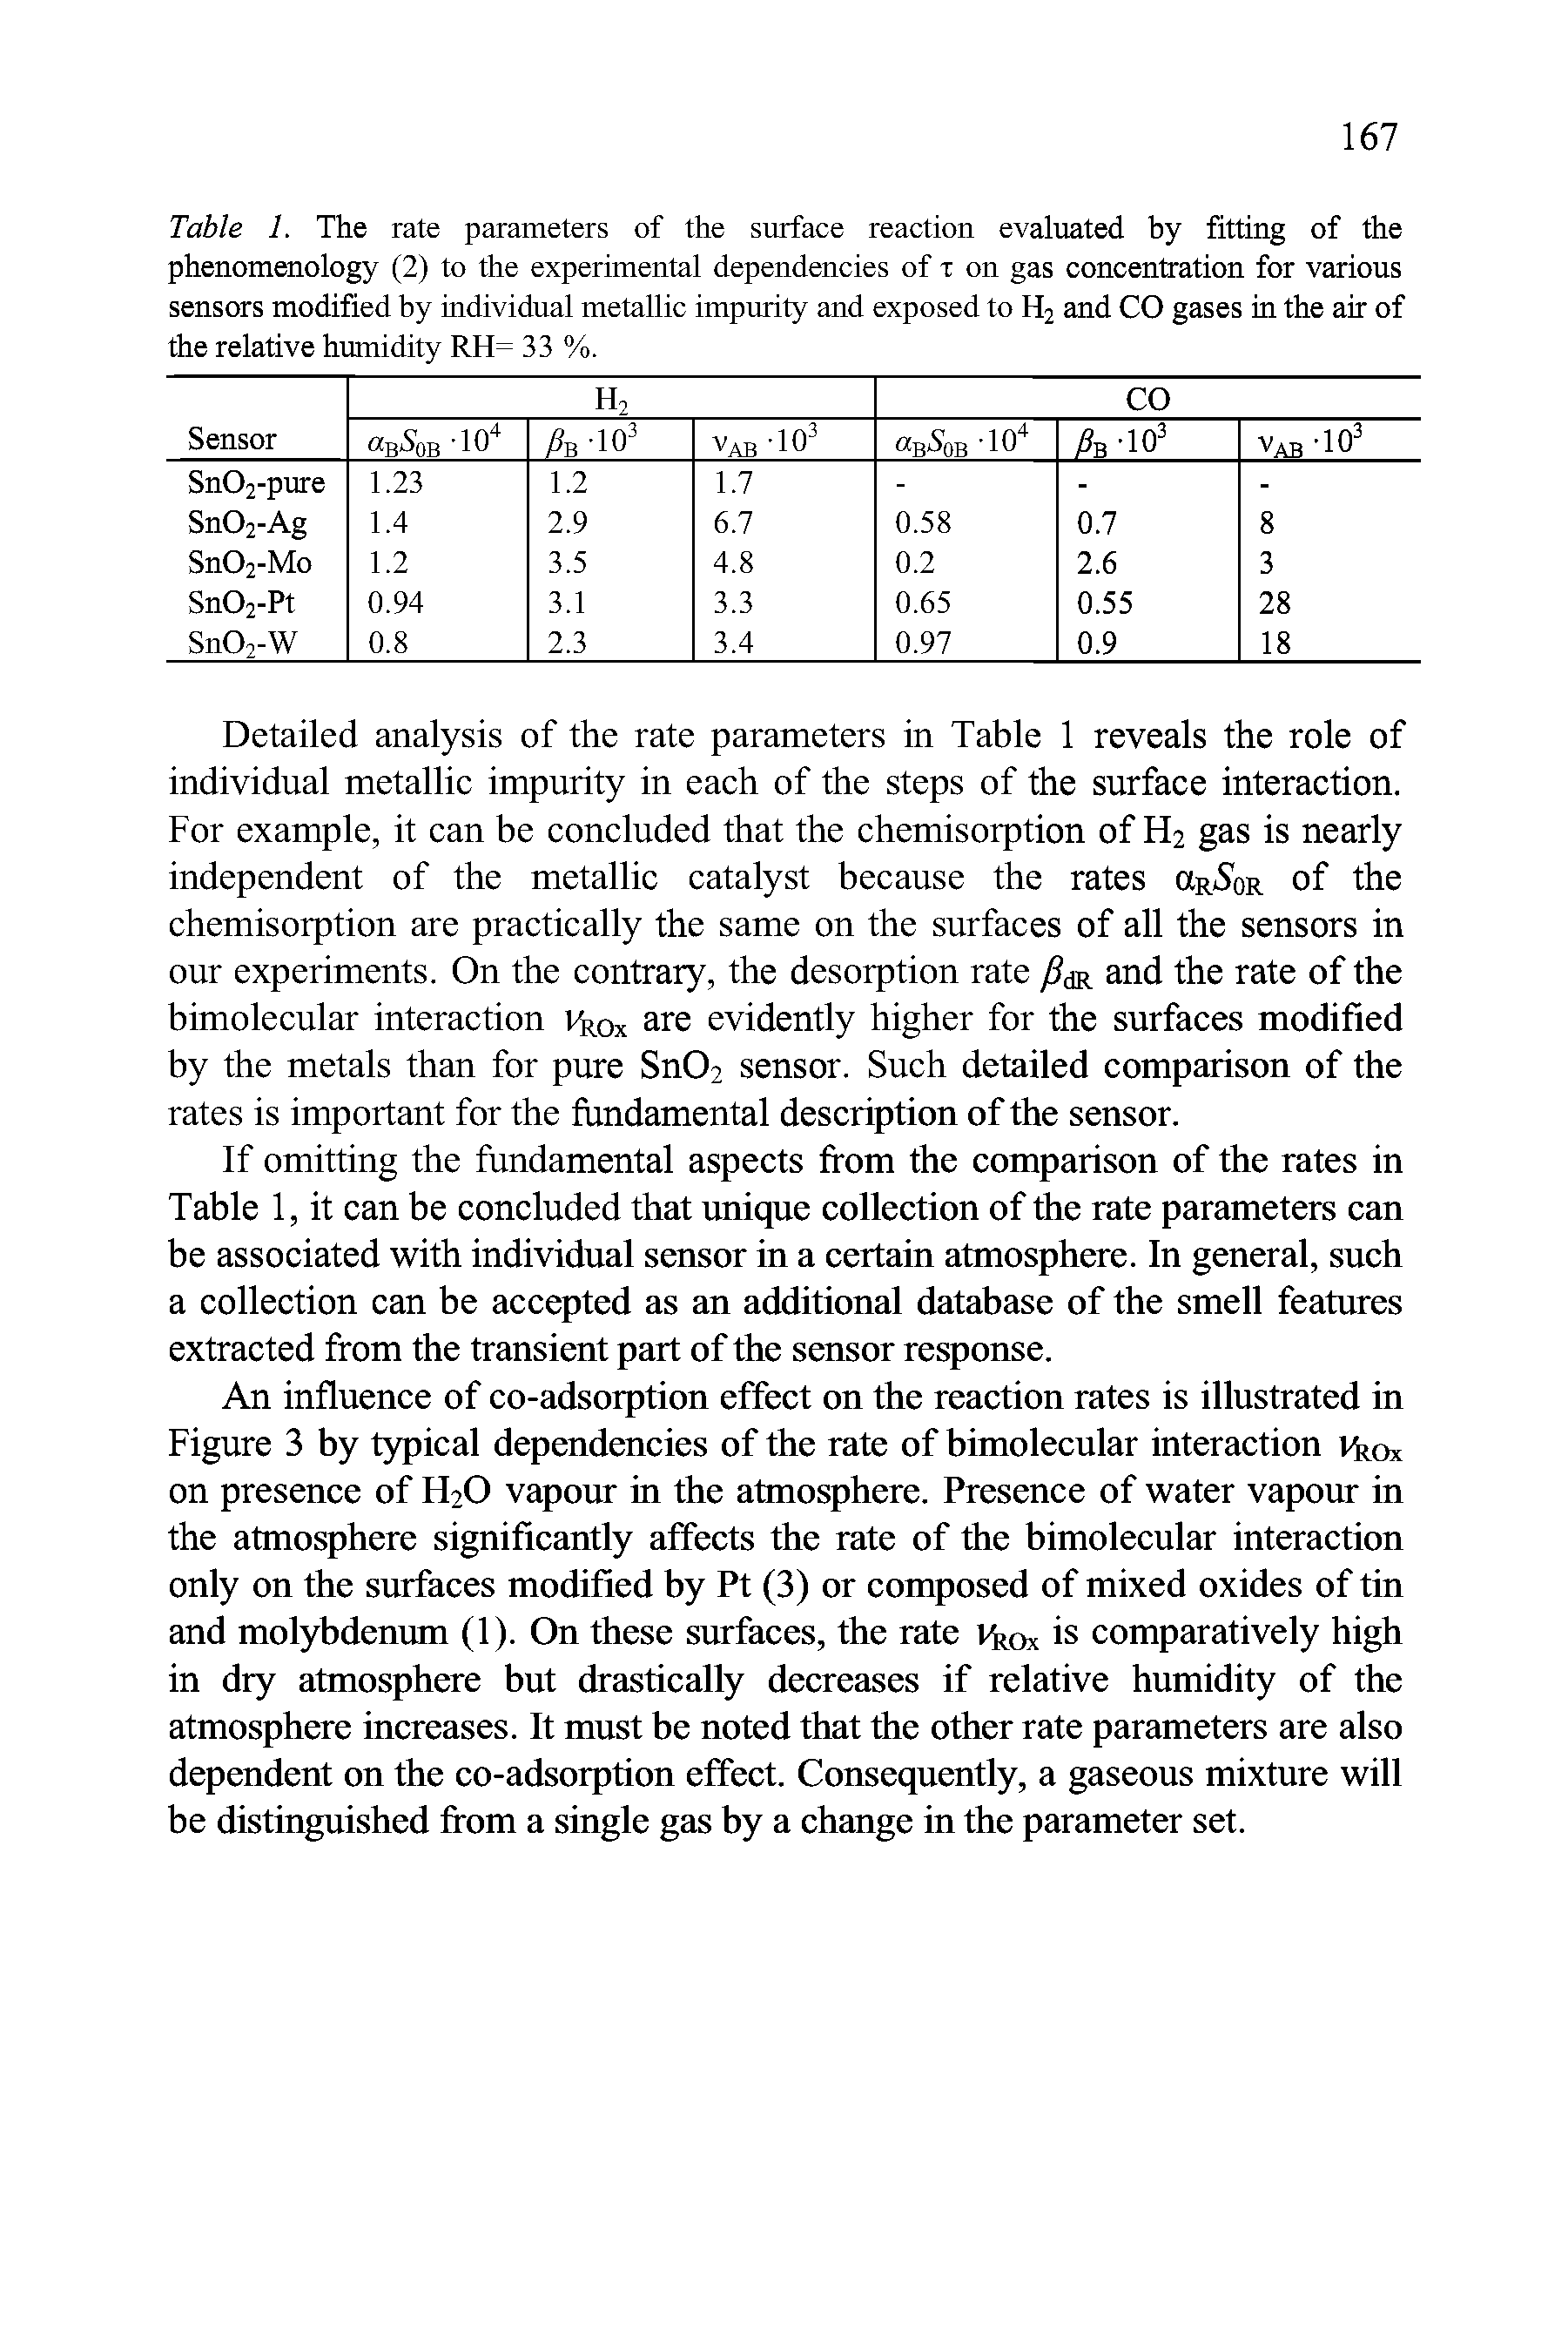 Table 1. The rate parameters of the surface reaction evaluated hy fitting of the phenomenology (2) to the experimental dependencies of r on gas concentration for various sensors modified by individual metallic impurity and exposed to H2 and CO gases in the air of the relative humidity RH= 33 %.